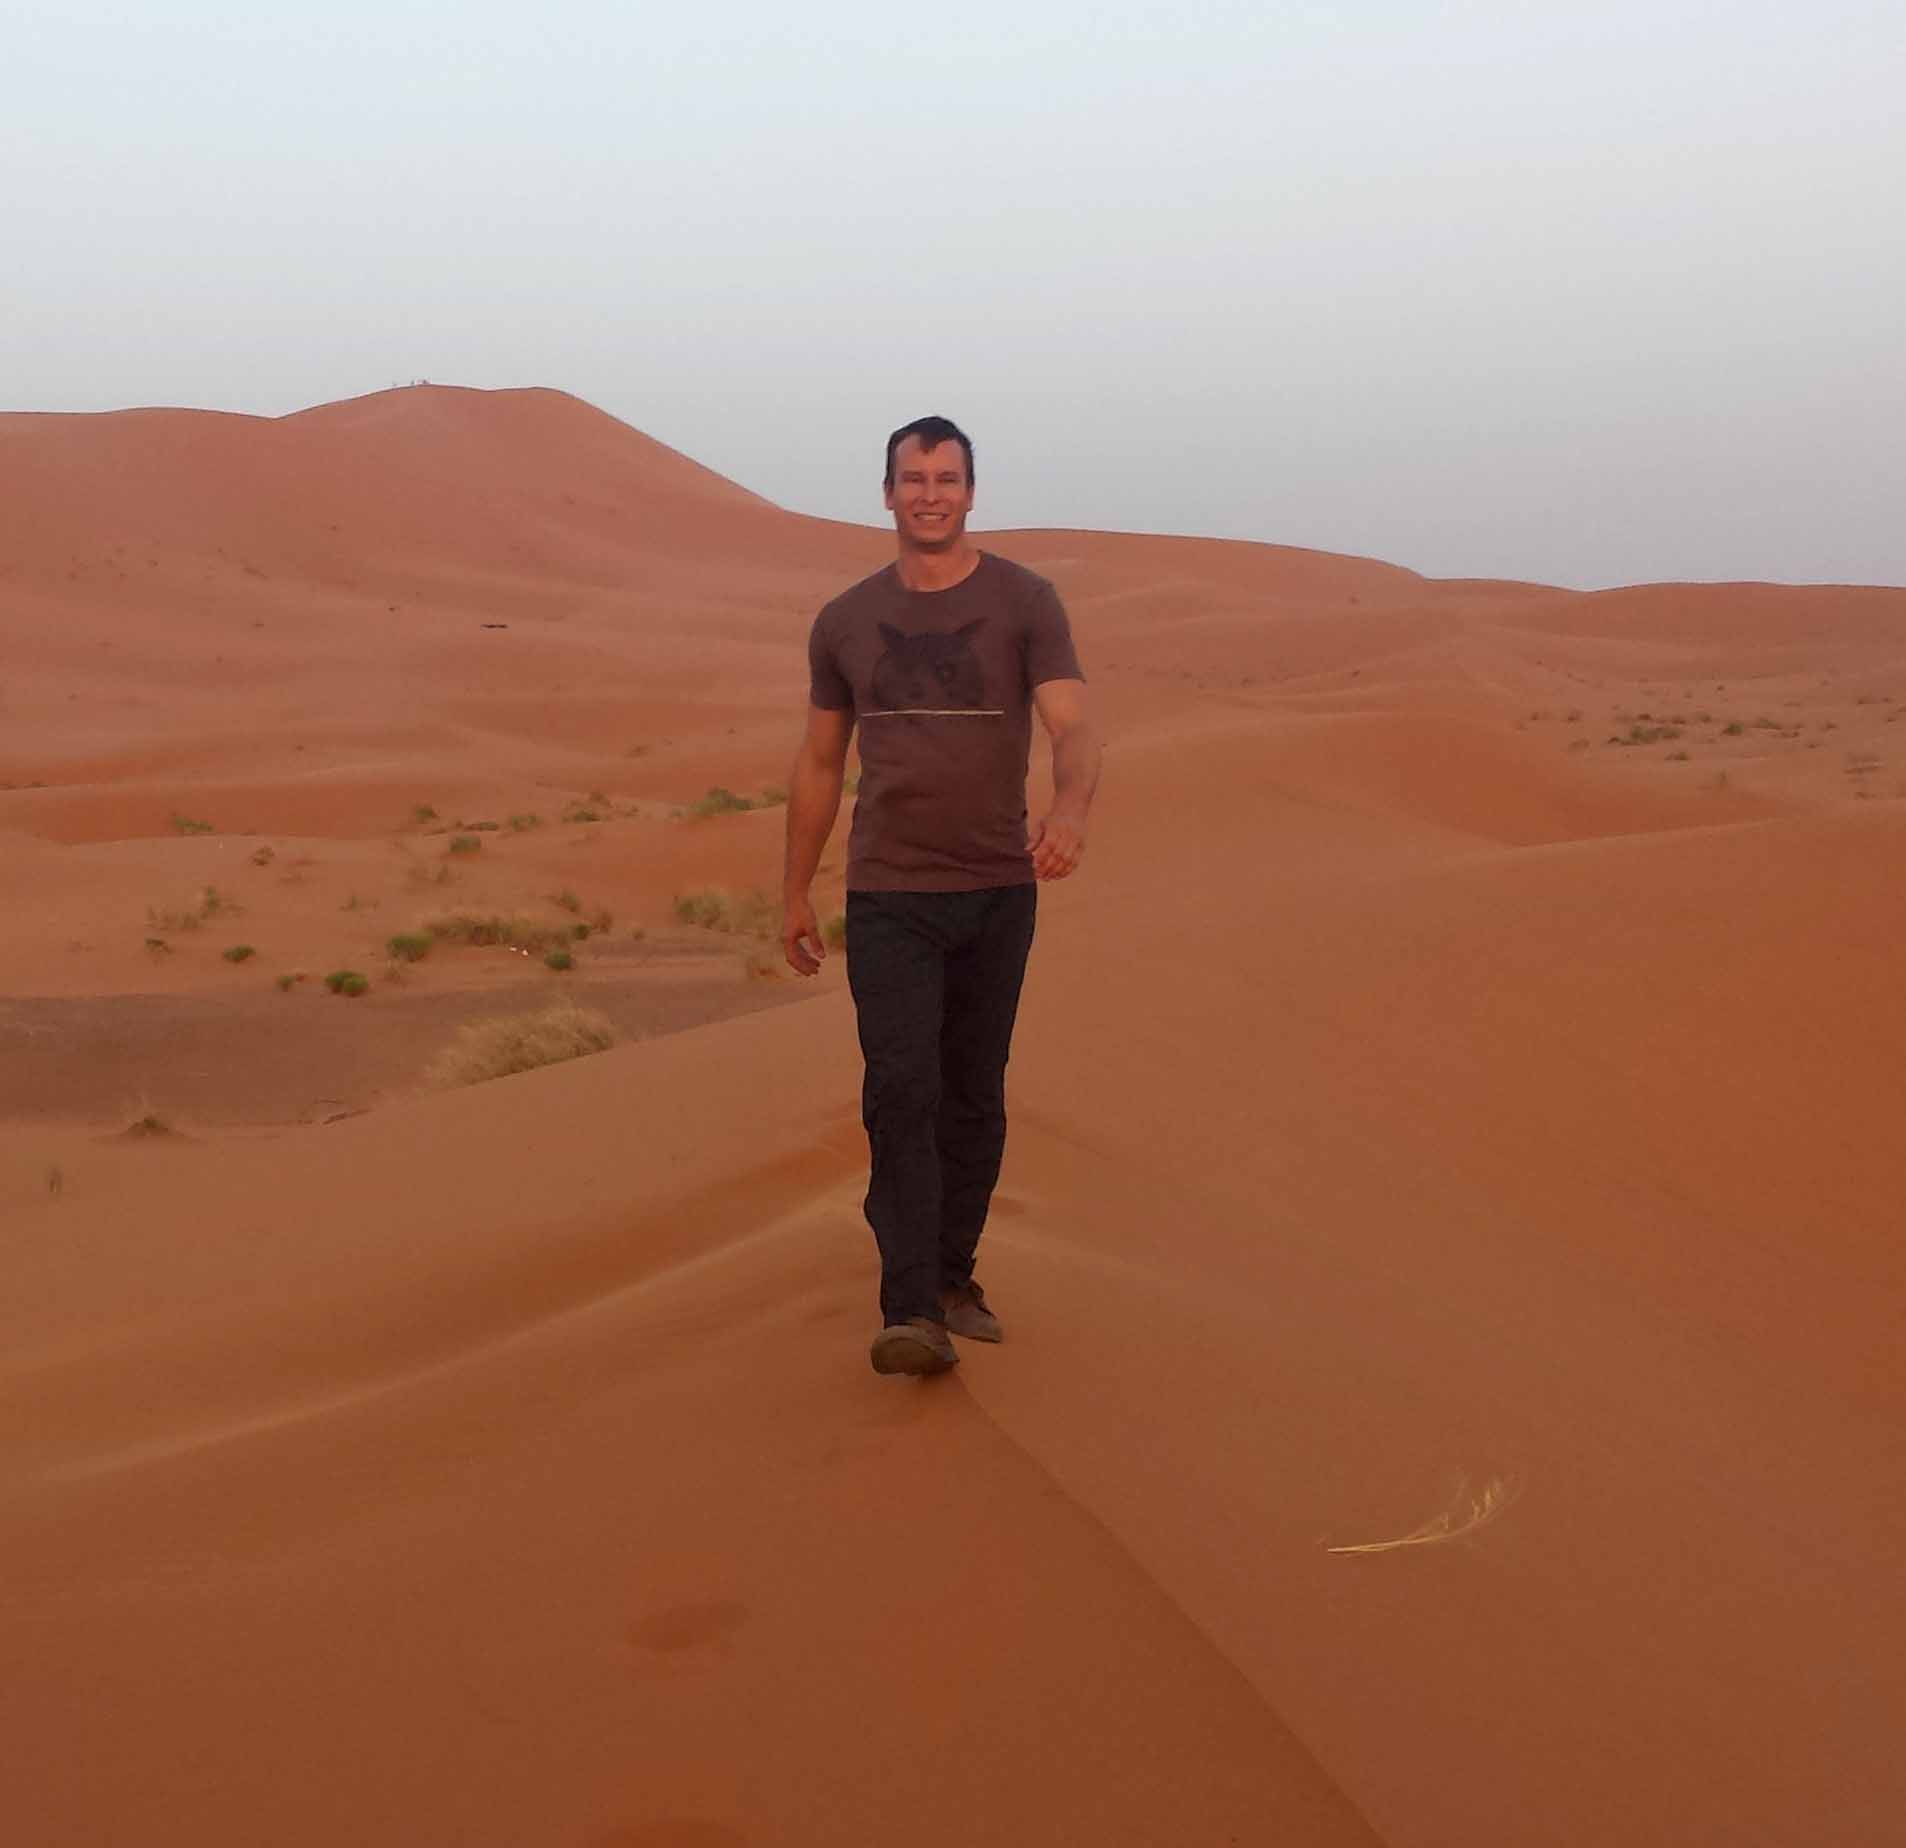 Chris Reynolds, an agribusiness major in the UGA College of Agricultural and Environmental Sciences, presented on his horticultural internship in Morocco during summer 2015. Reynolds is an International Certificate Student and presented at the inaugural international agriculture certificate students night.